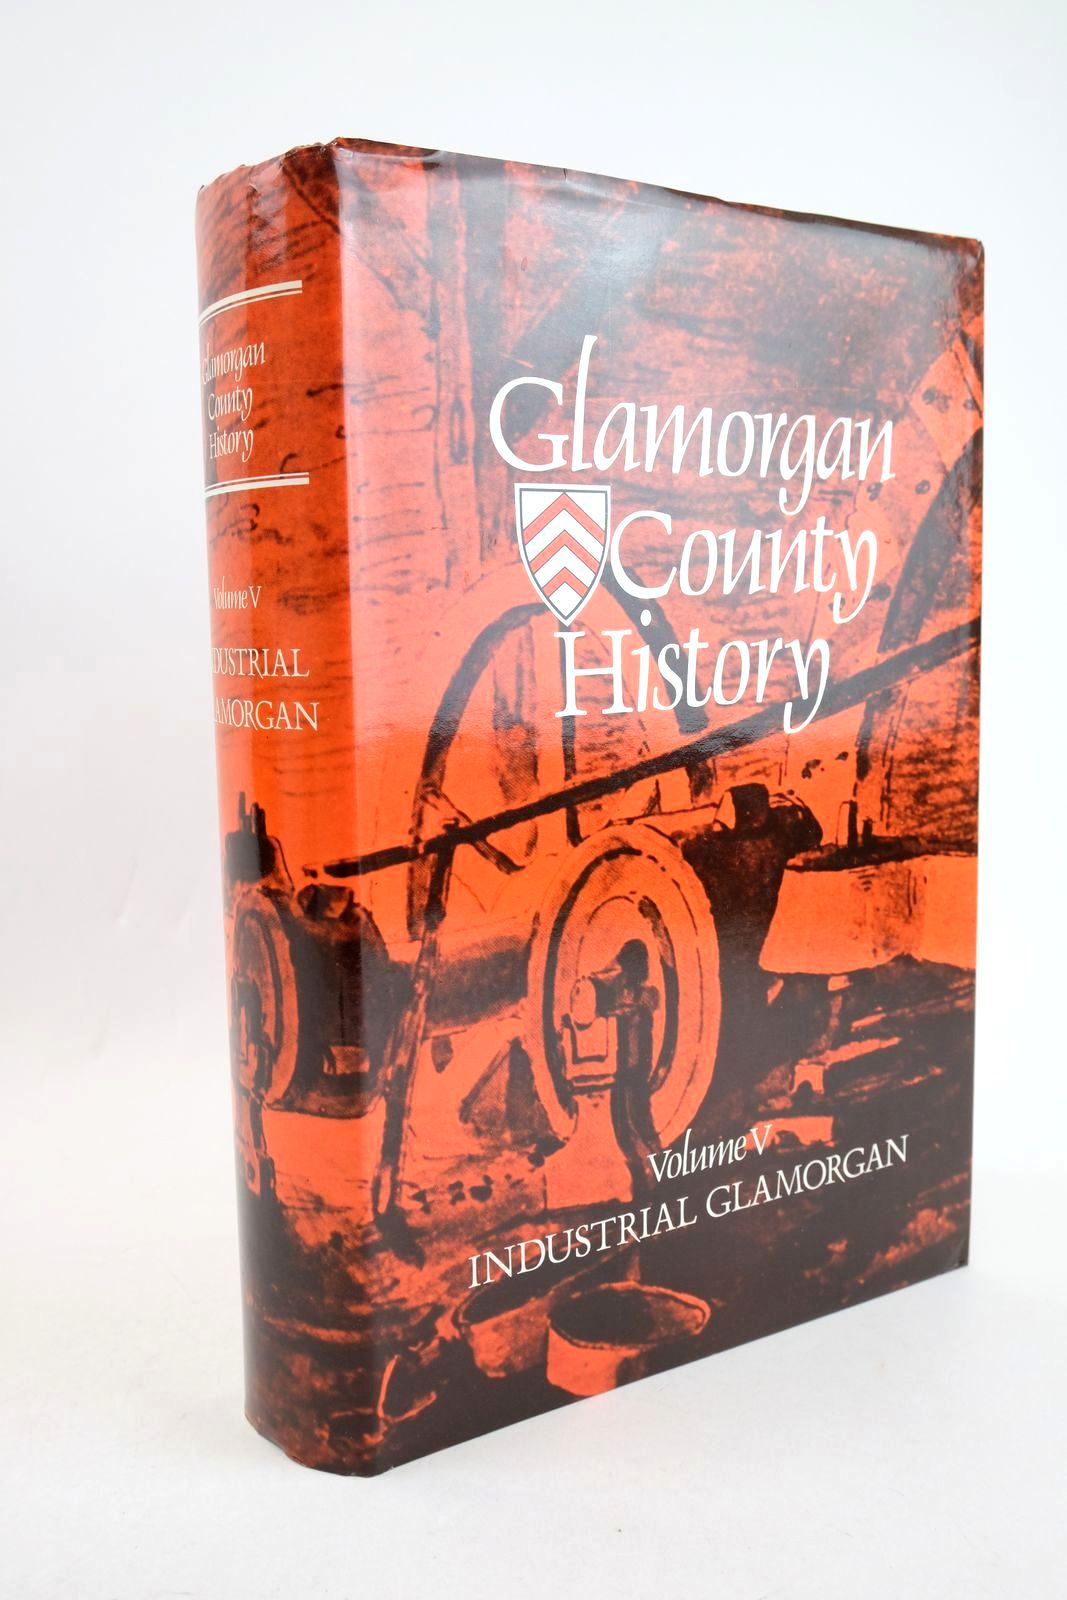 Photo of GLAMORGAN COUNTY HISTORY VOLUME V written by John, Arthur H. Williams, Glanmor published by Glamorgan County History Trust (STOCK CODE: 1327175)  for sale by Stella & Rose's Books